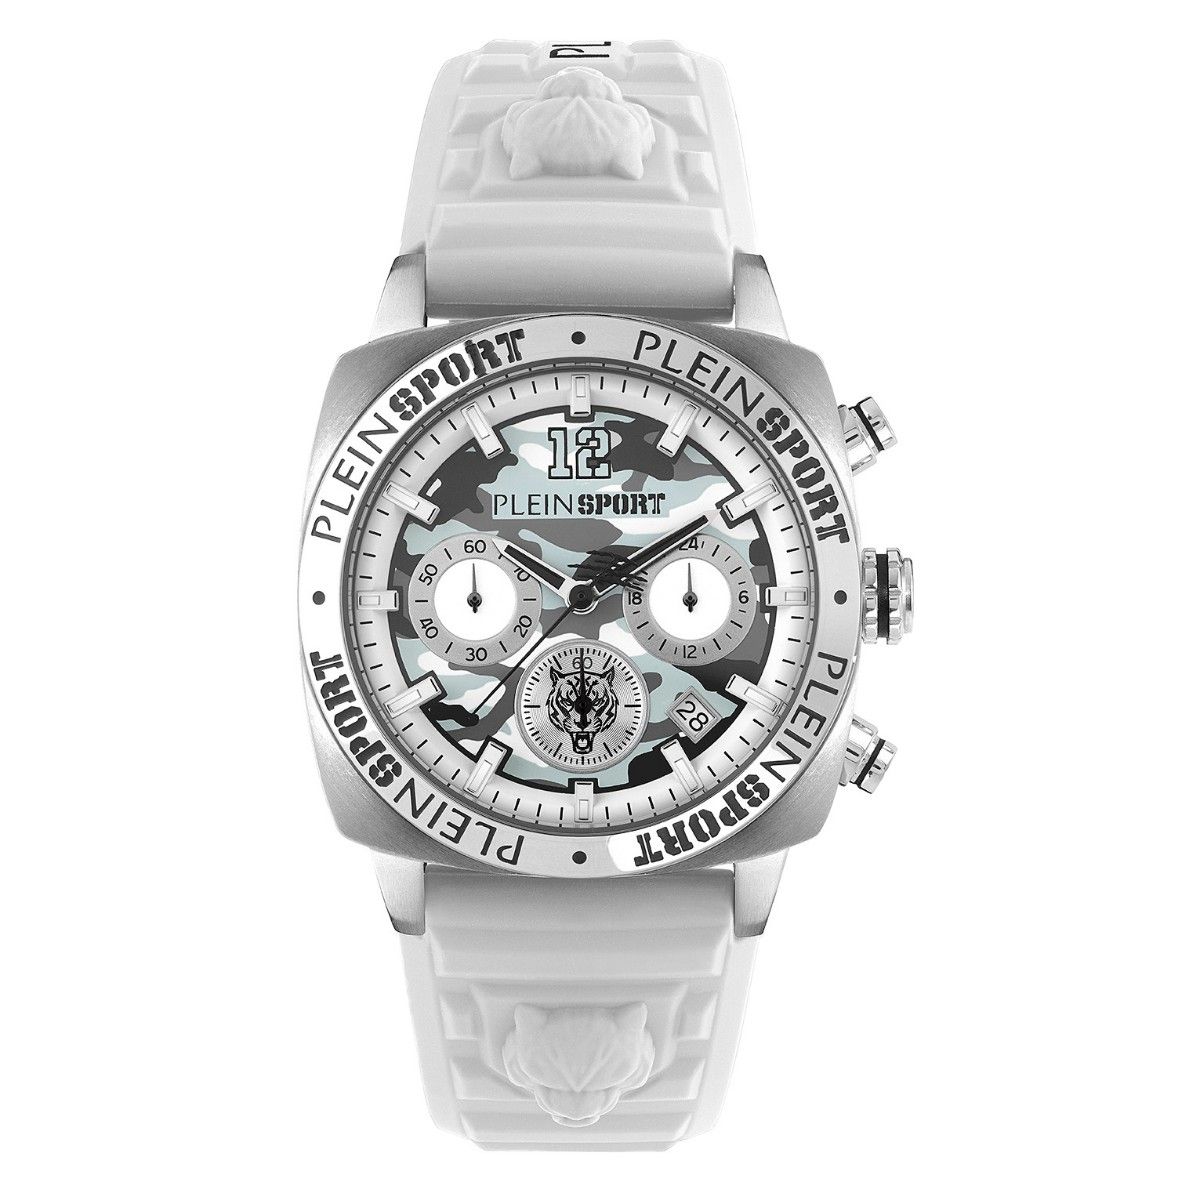 Wildcat Male Black Chronograph Silicon Watch PSGBA0523 – Just In Time